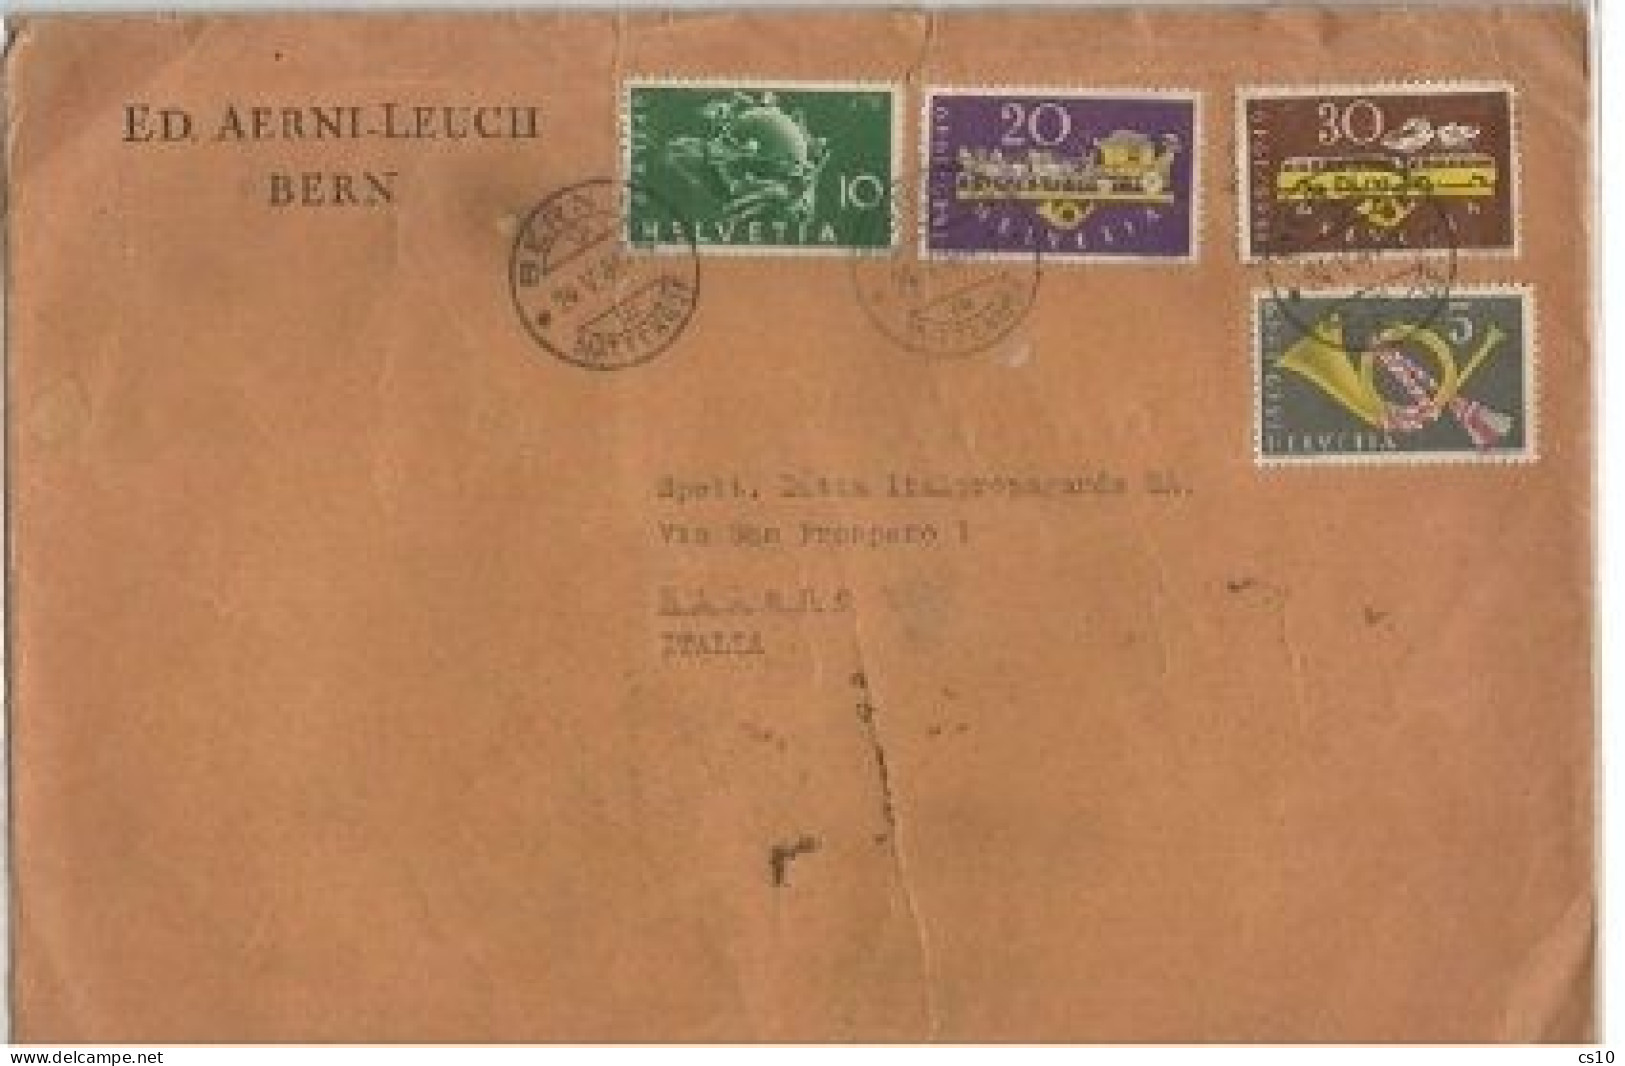 Suisse Bern 24may1949 CV To Italy With UPU C.5 + Nat. Postal Service 3v - 1st Month Of Use !!! - Correo Postal